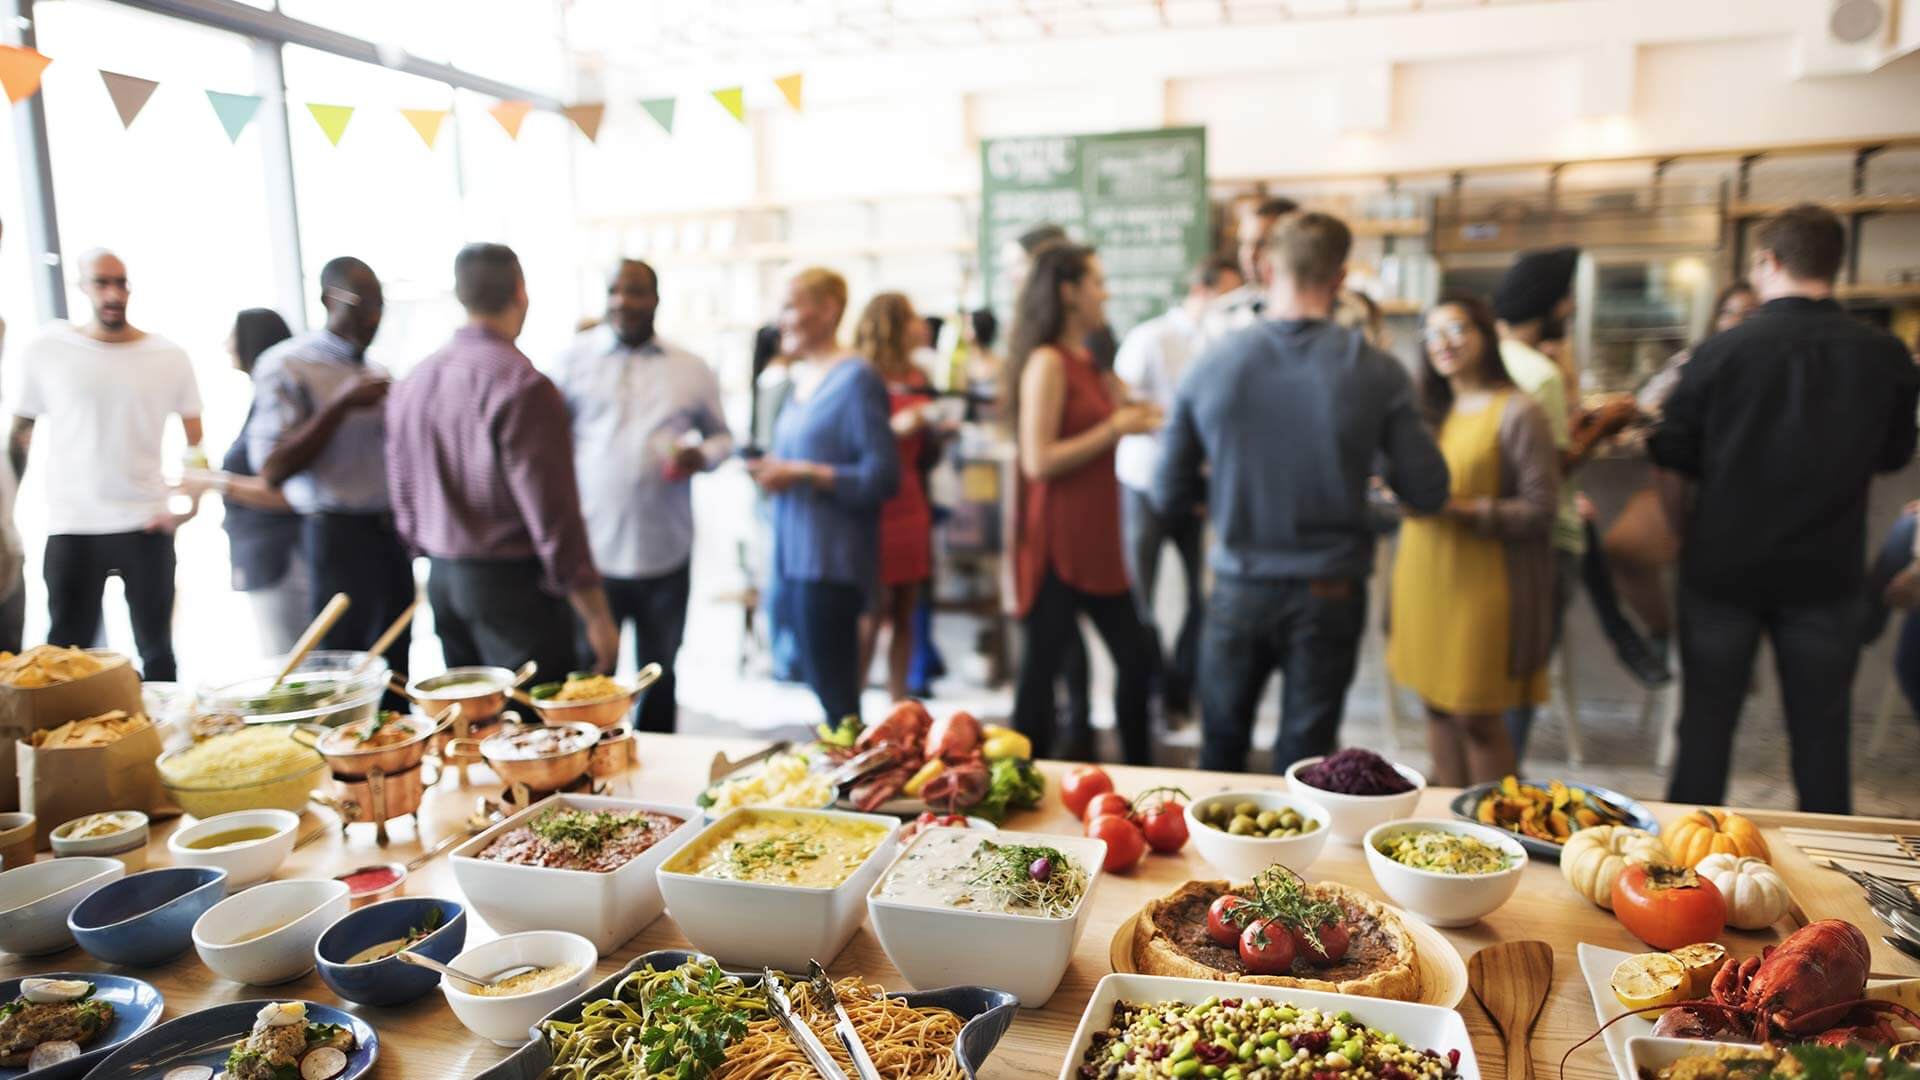 People at a party with a selection of food, dips and snacks on a table